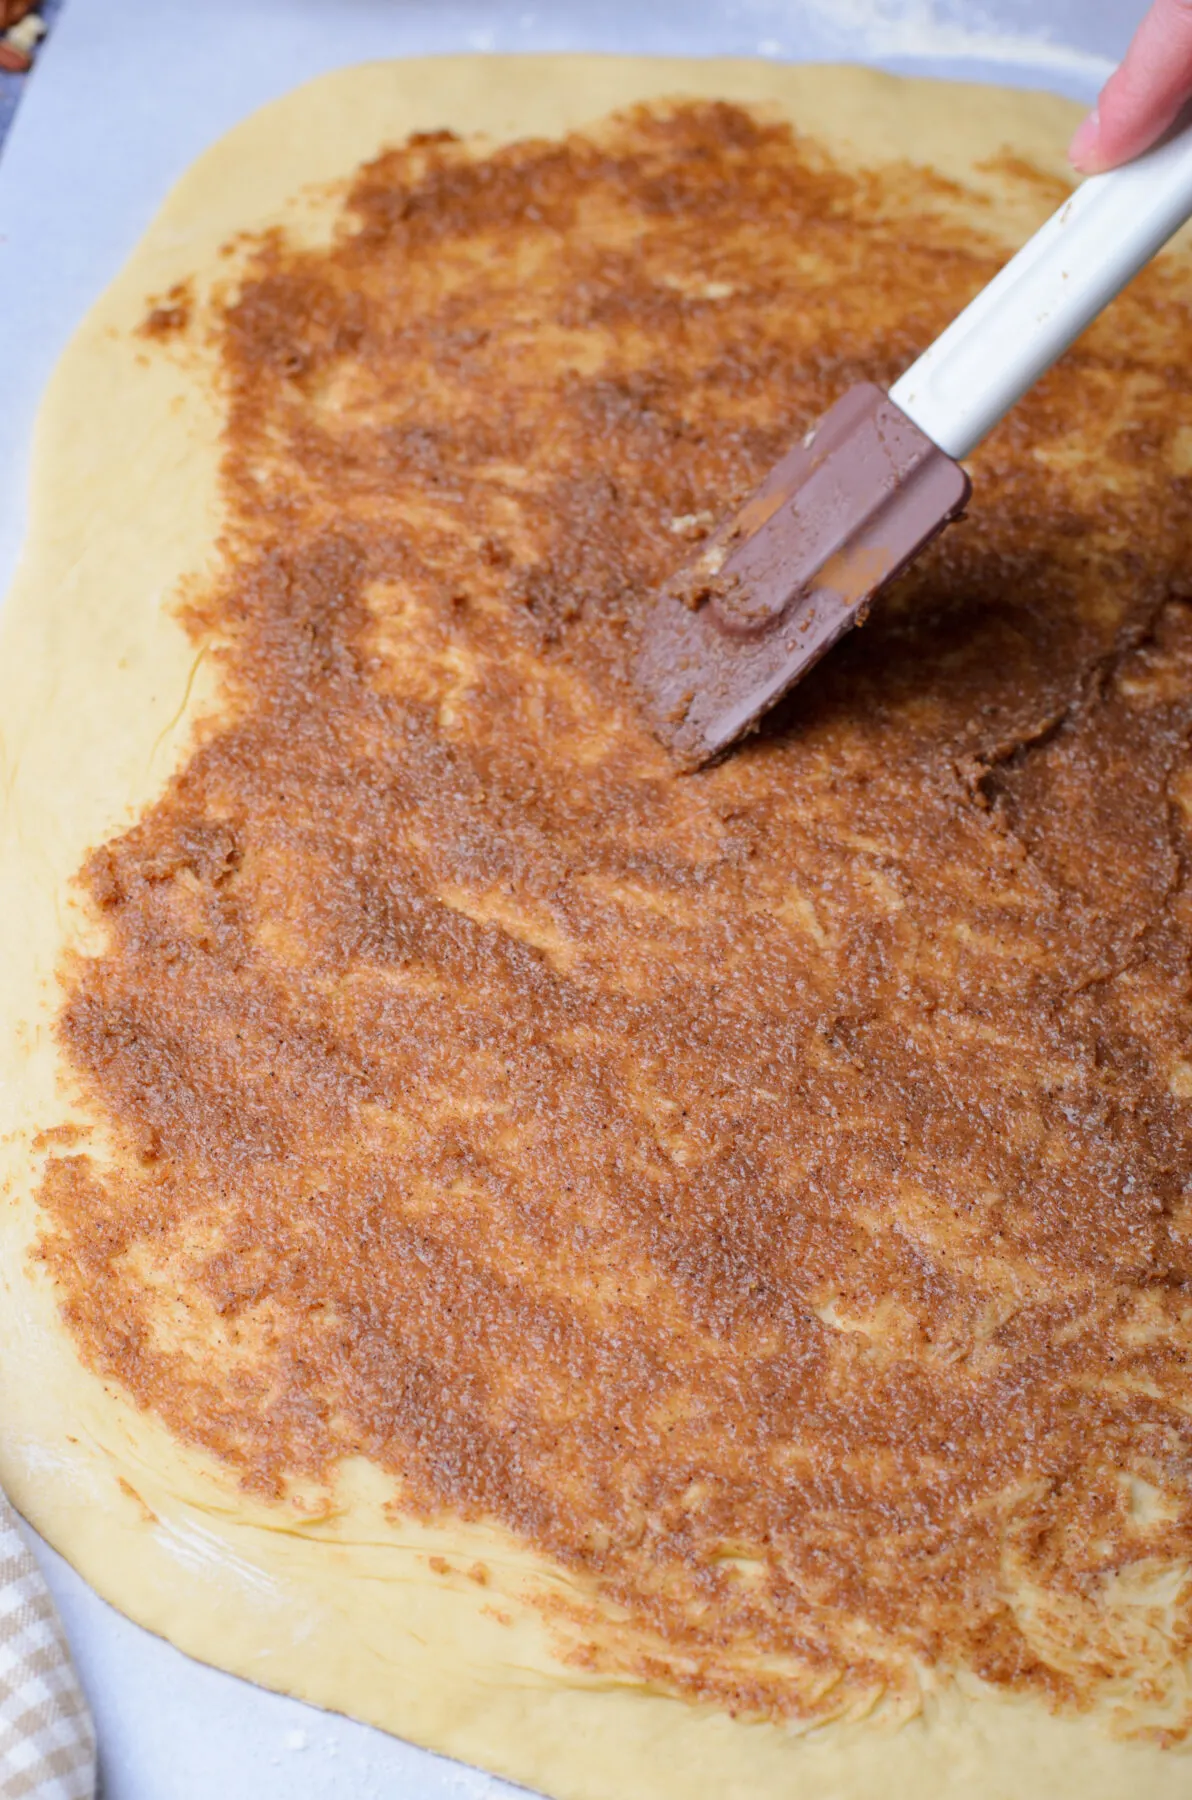 Cinnamon butter spread out on the dough.